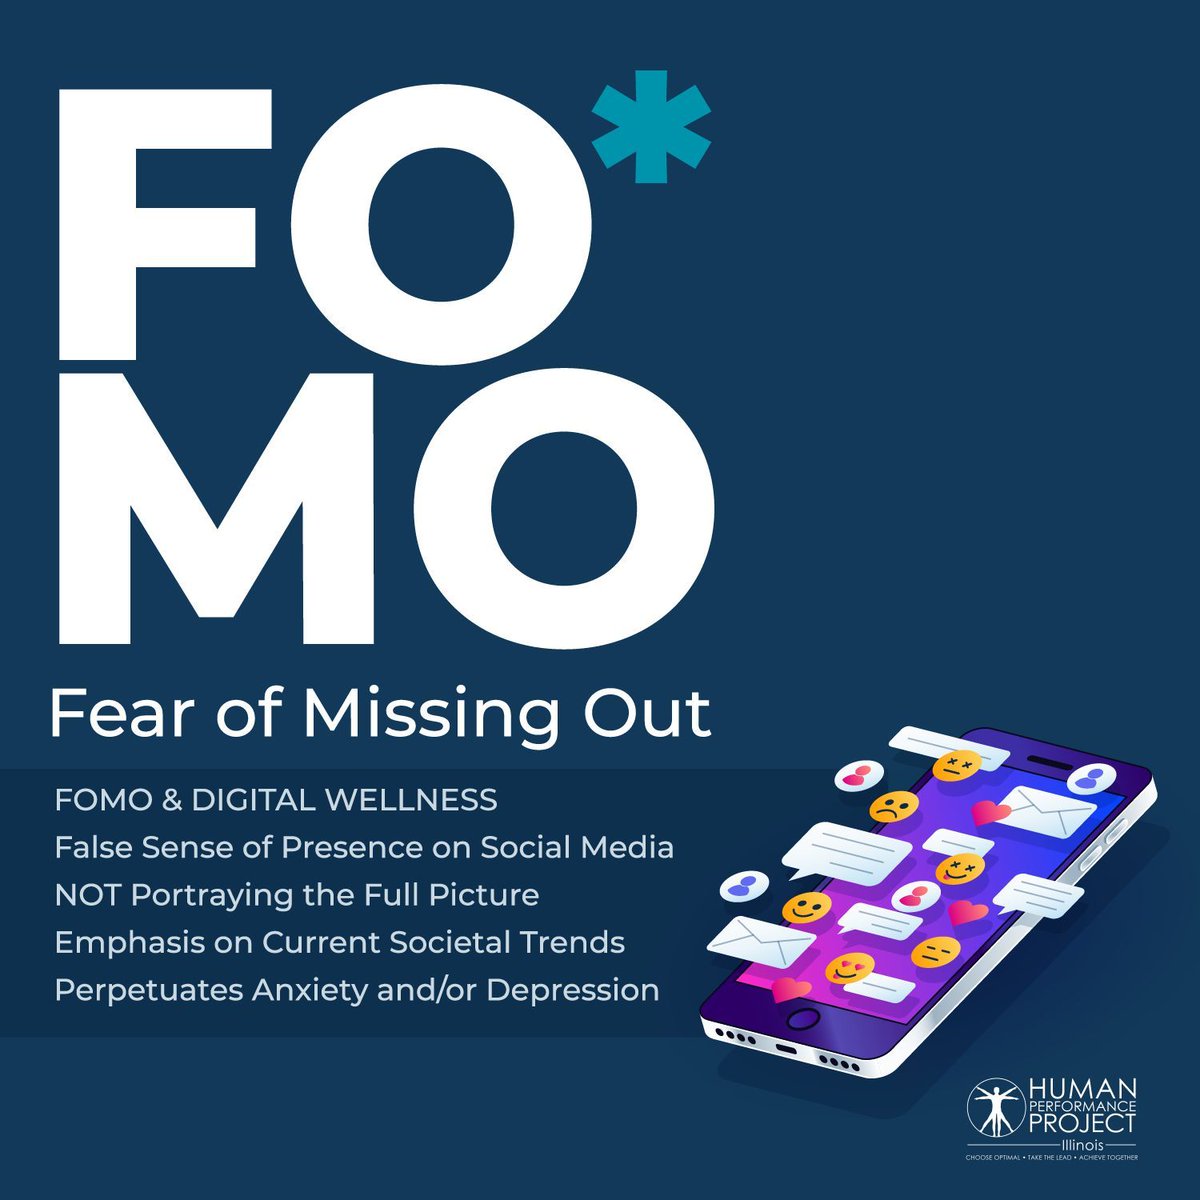 Who else has felt FOMO before? Take some time to unplug and learn more ways to improve your Digital Wellness. Digital Wellness is the pursuit of an intentional and healthy relationship with technology. #DigitalWellnessDay